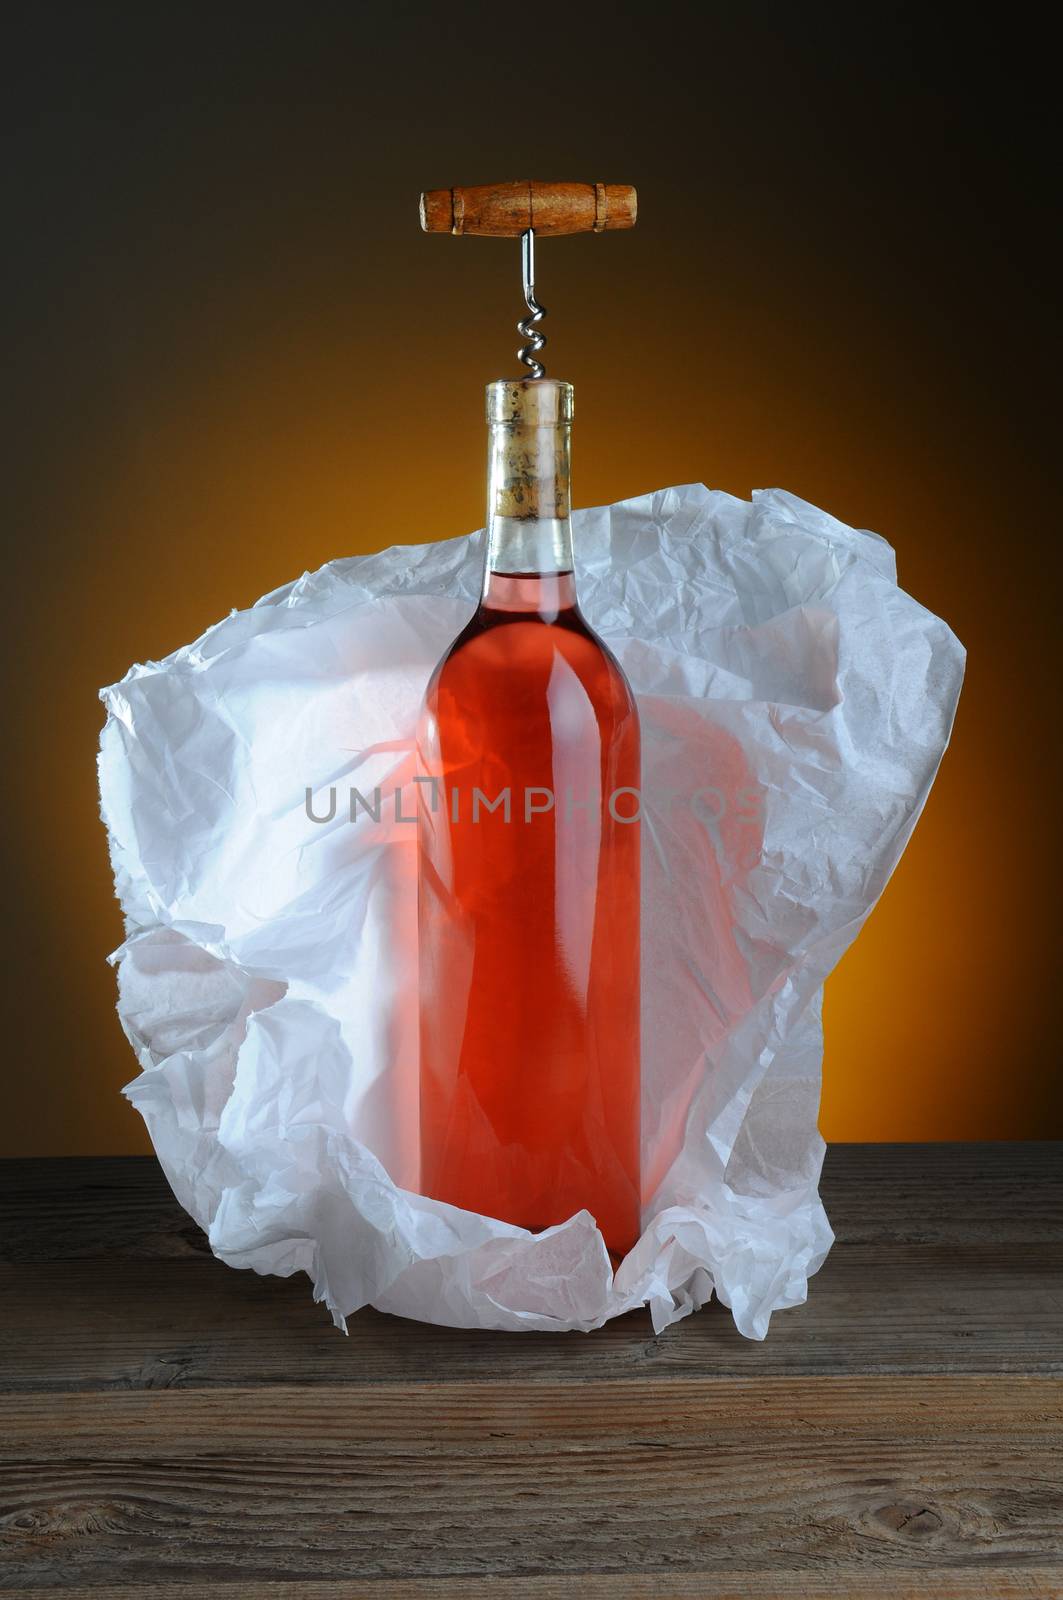 A bottle of blush wine wrapped in tissue paper, on a rustic wood surface and a light to dark warm background.
A vintage cork screw is inserted in the bottle.